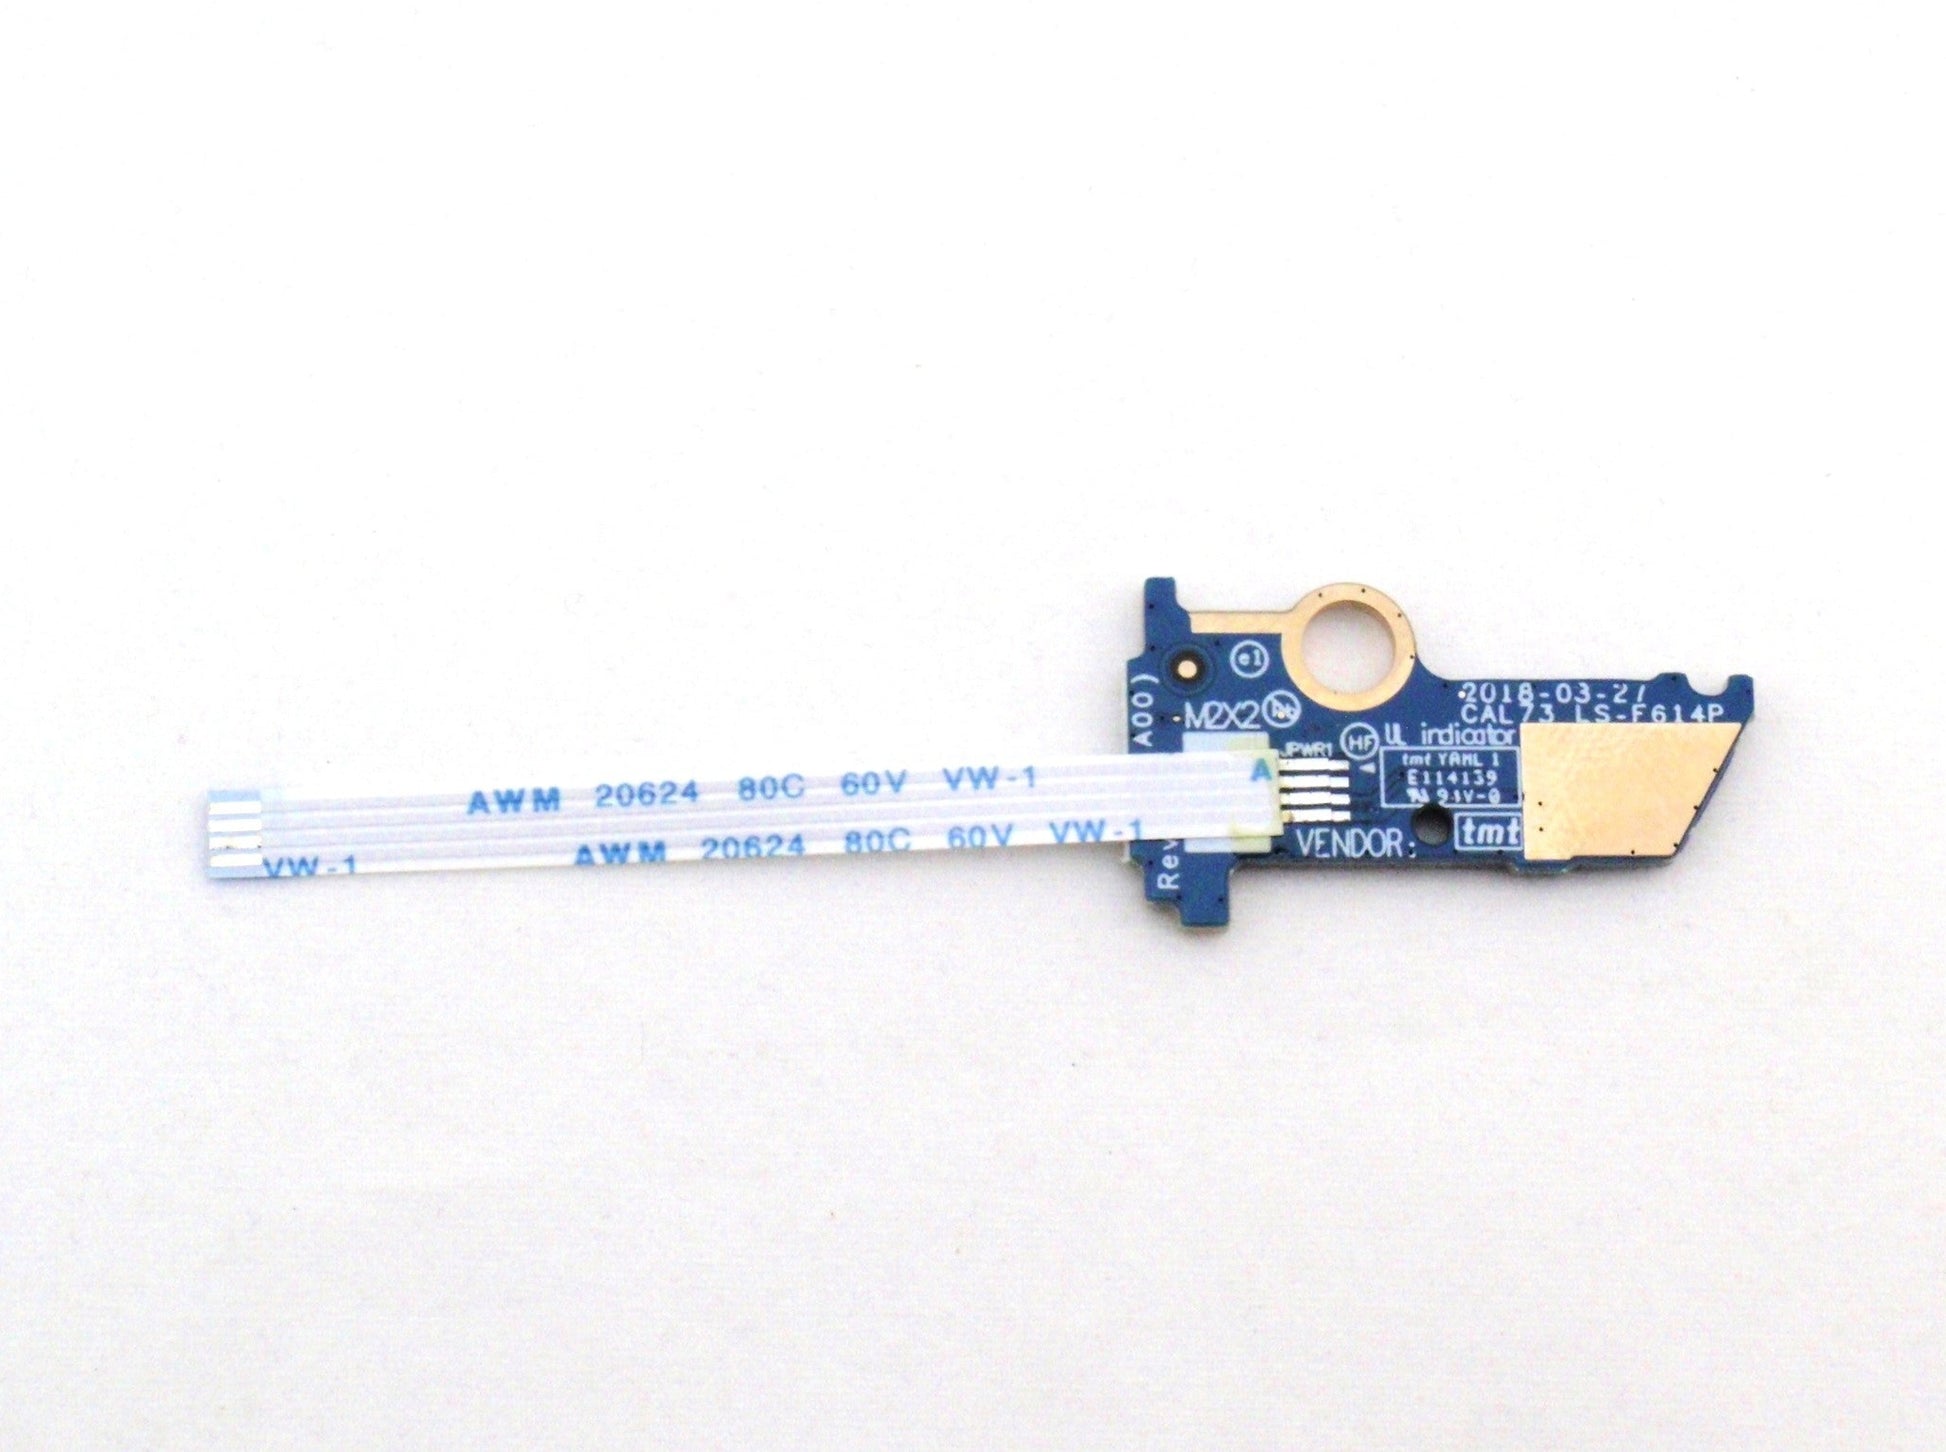 Dell New Power Button Switch Board G3 3579 3779 G3-3579 G3-3779 0HYYT6 LS-F611P LS-F614P HYYT6 